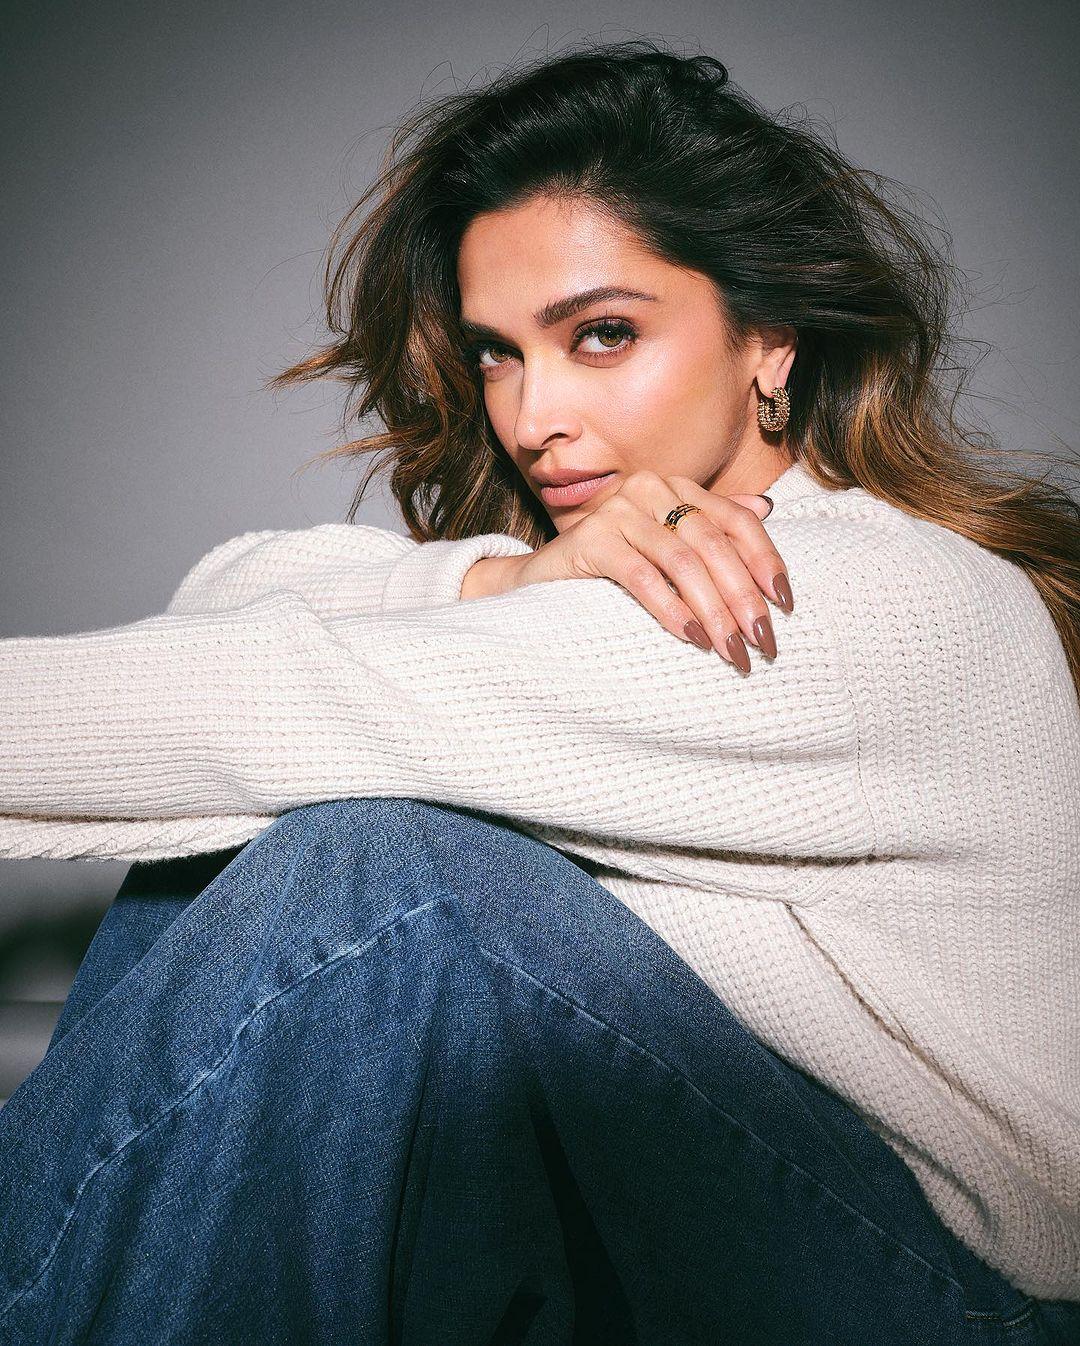 Deepika Padukone was missing from the promotional activities of Fighter initially, but joined Hrithik Roshan and the film's director for public appearances closer to the film's release